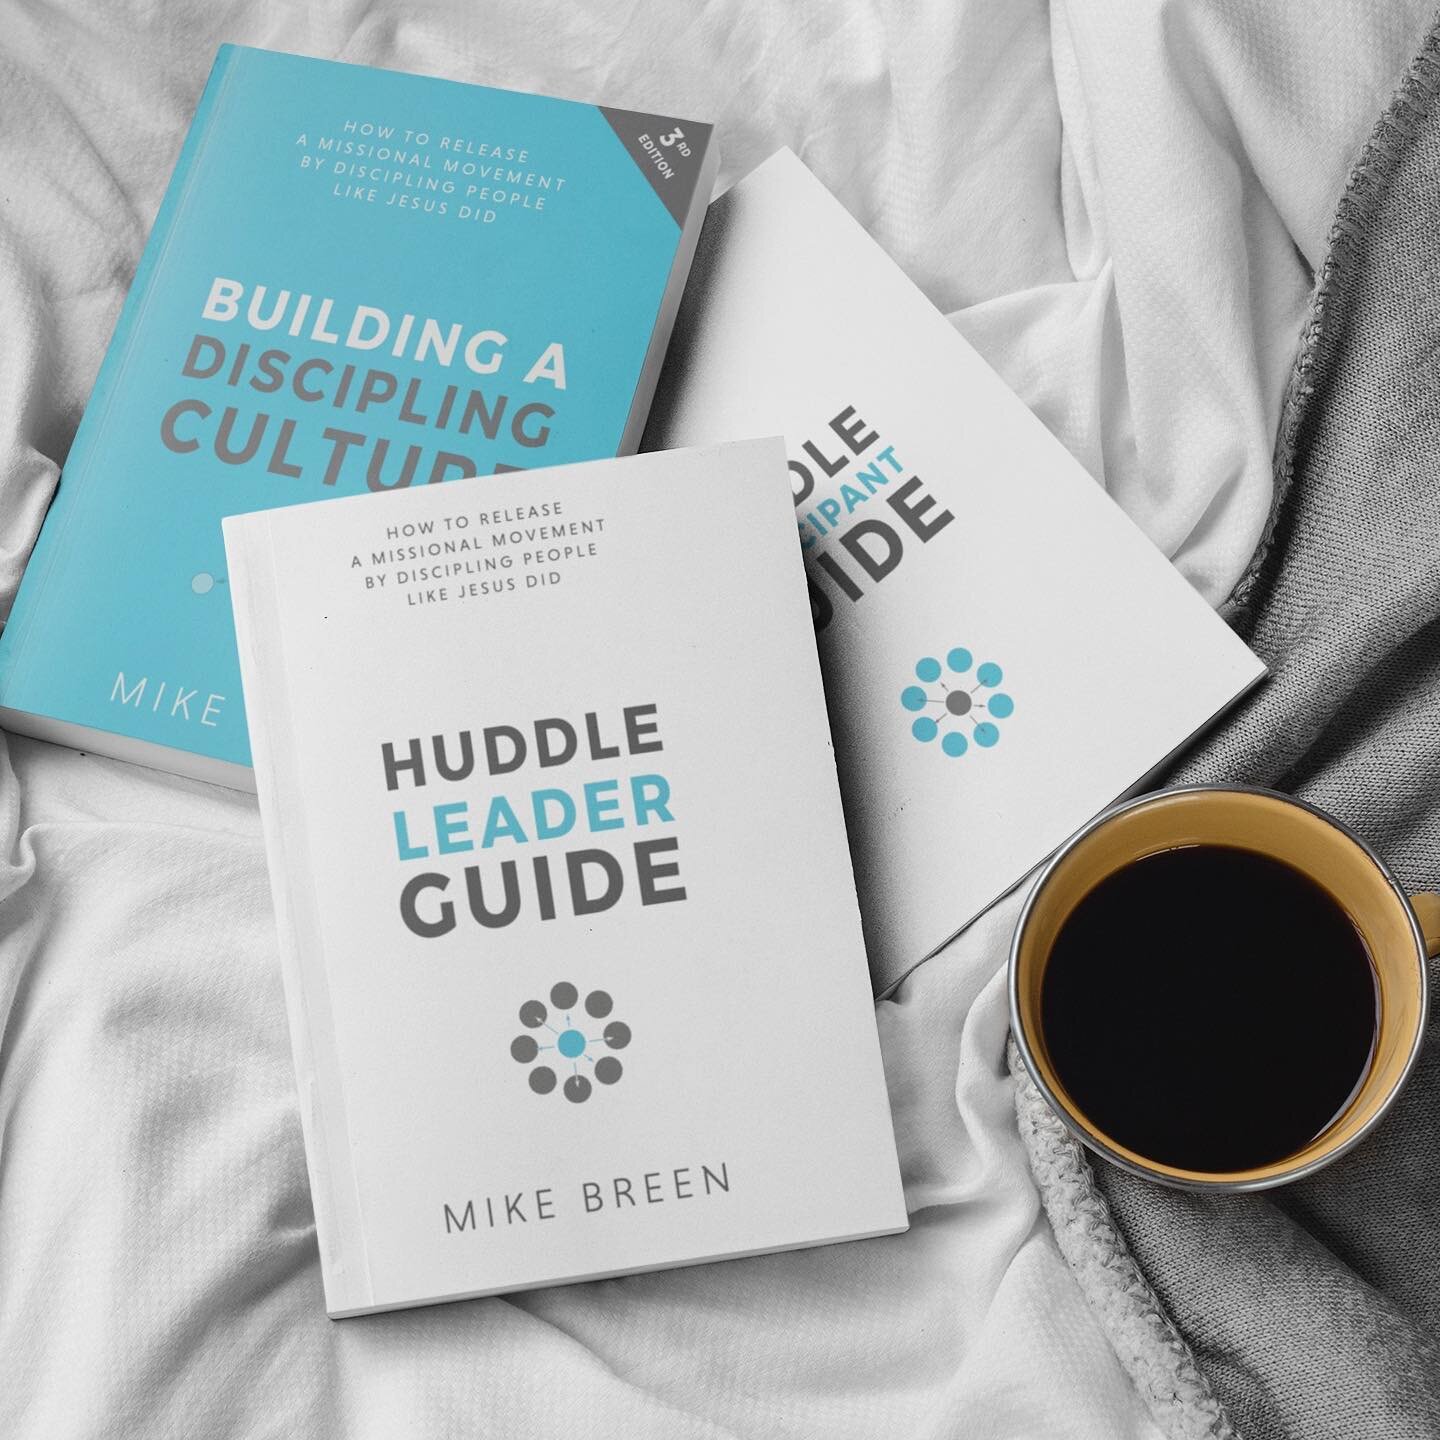 To offer the movement the best resources to continue to build discipling cultures in every context we are offering an additional 15% discount for Premium Huddle Bundle this month.&nbsp;
&nbsp;
Take advance to resource those you are Building a Discipl